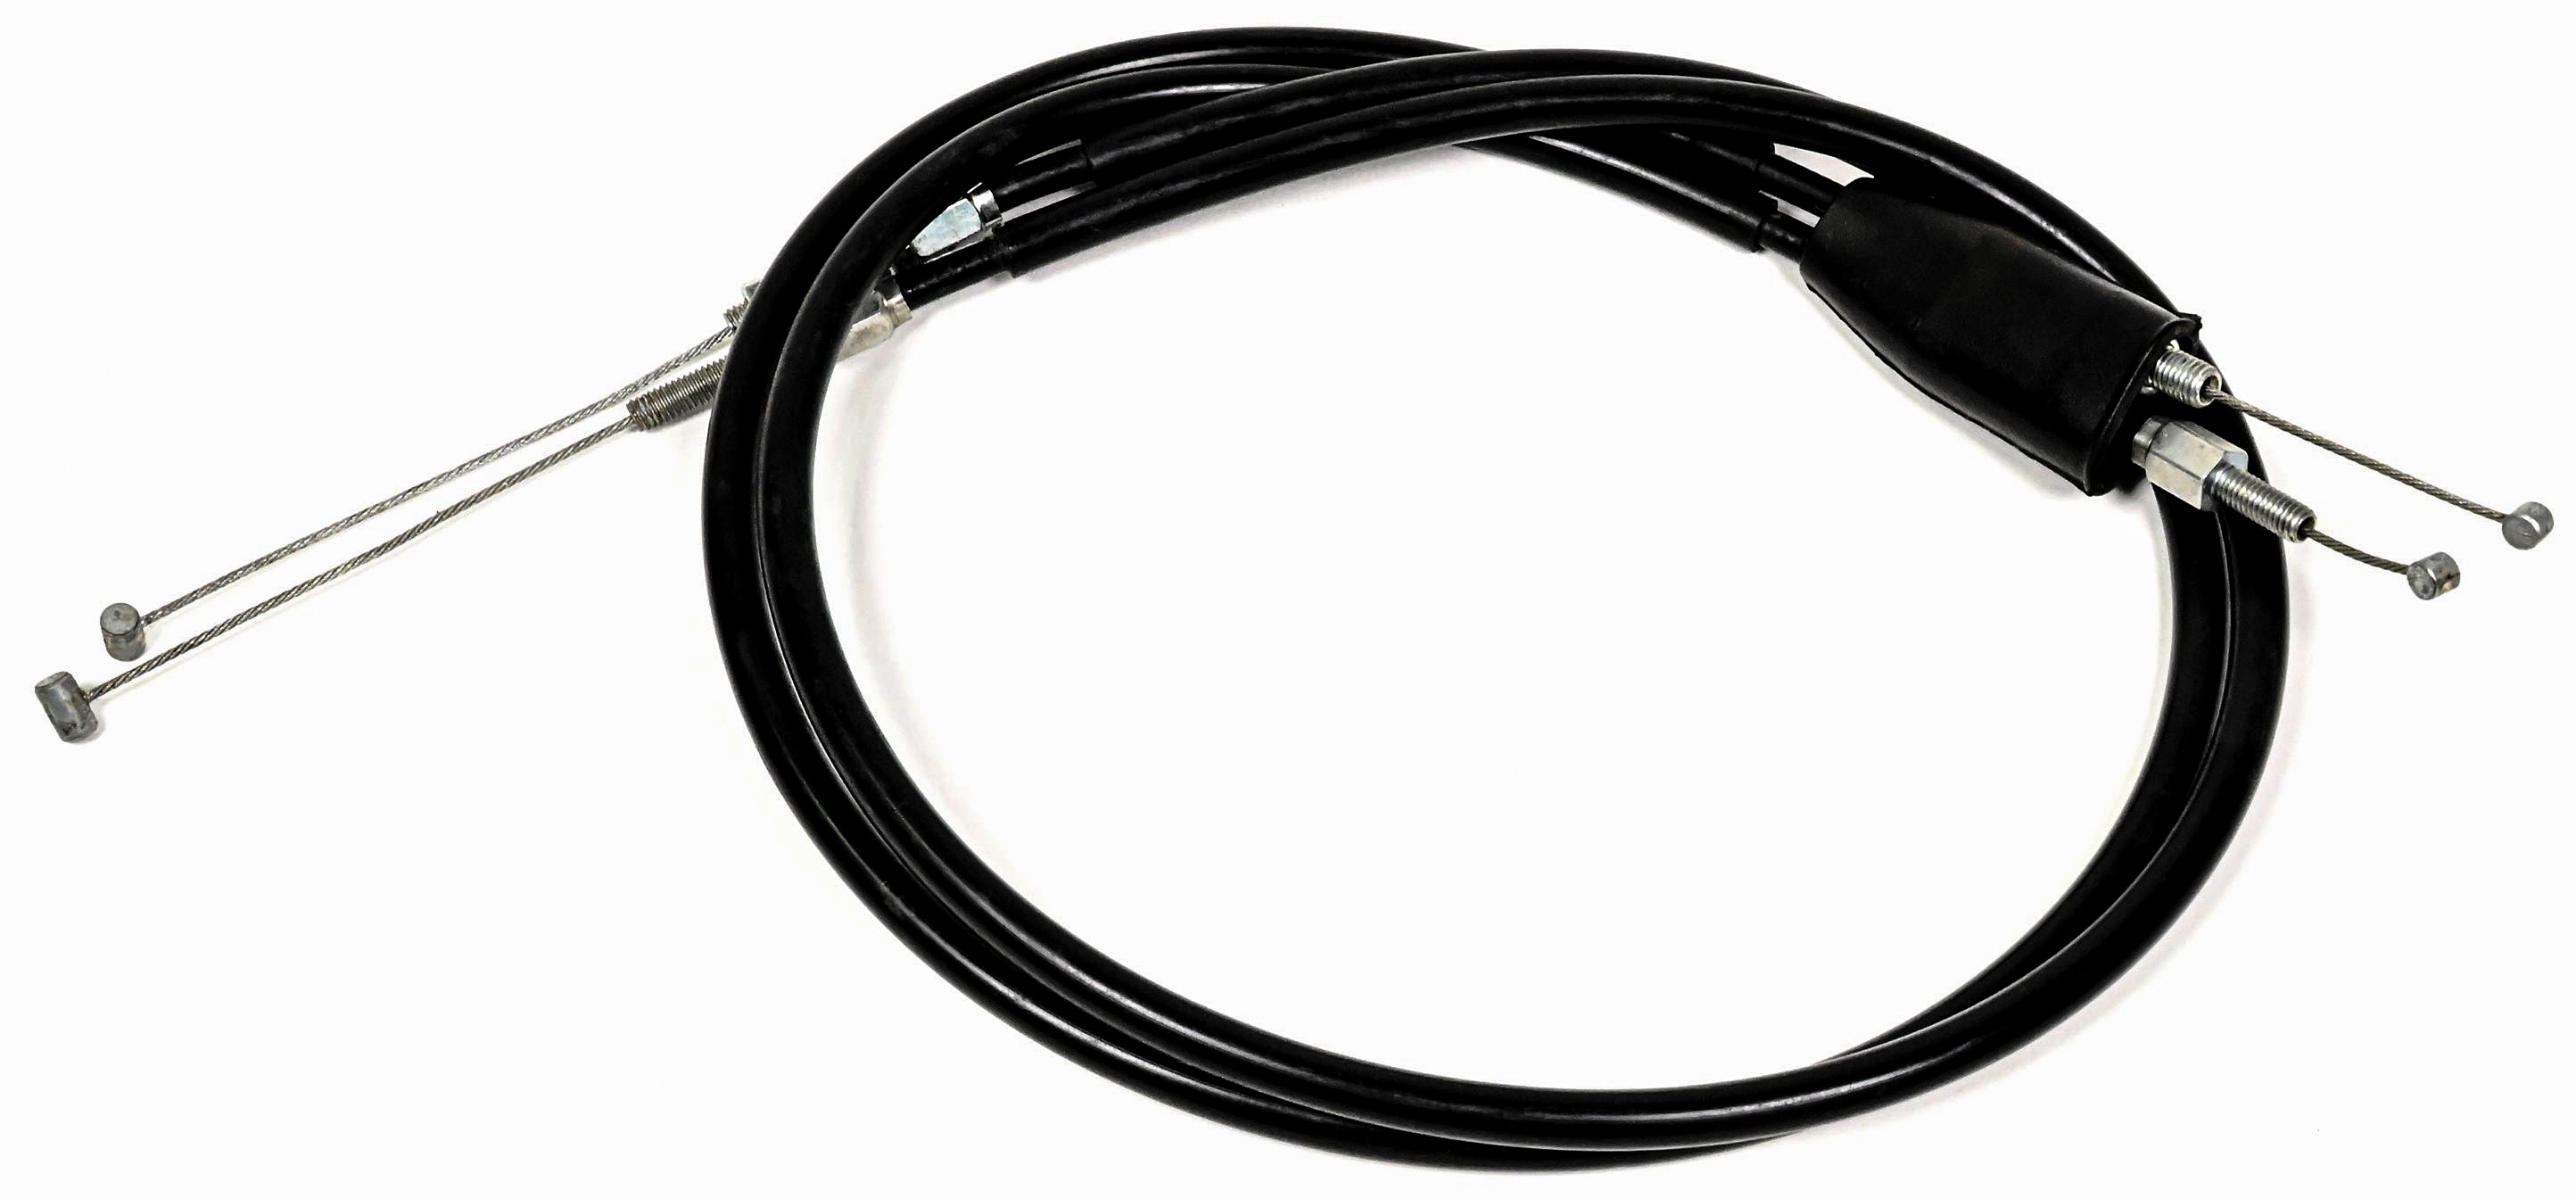 Bbr - Throttle Cables - 510-HCF-1102